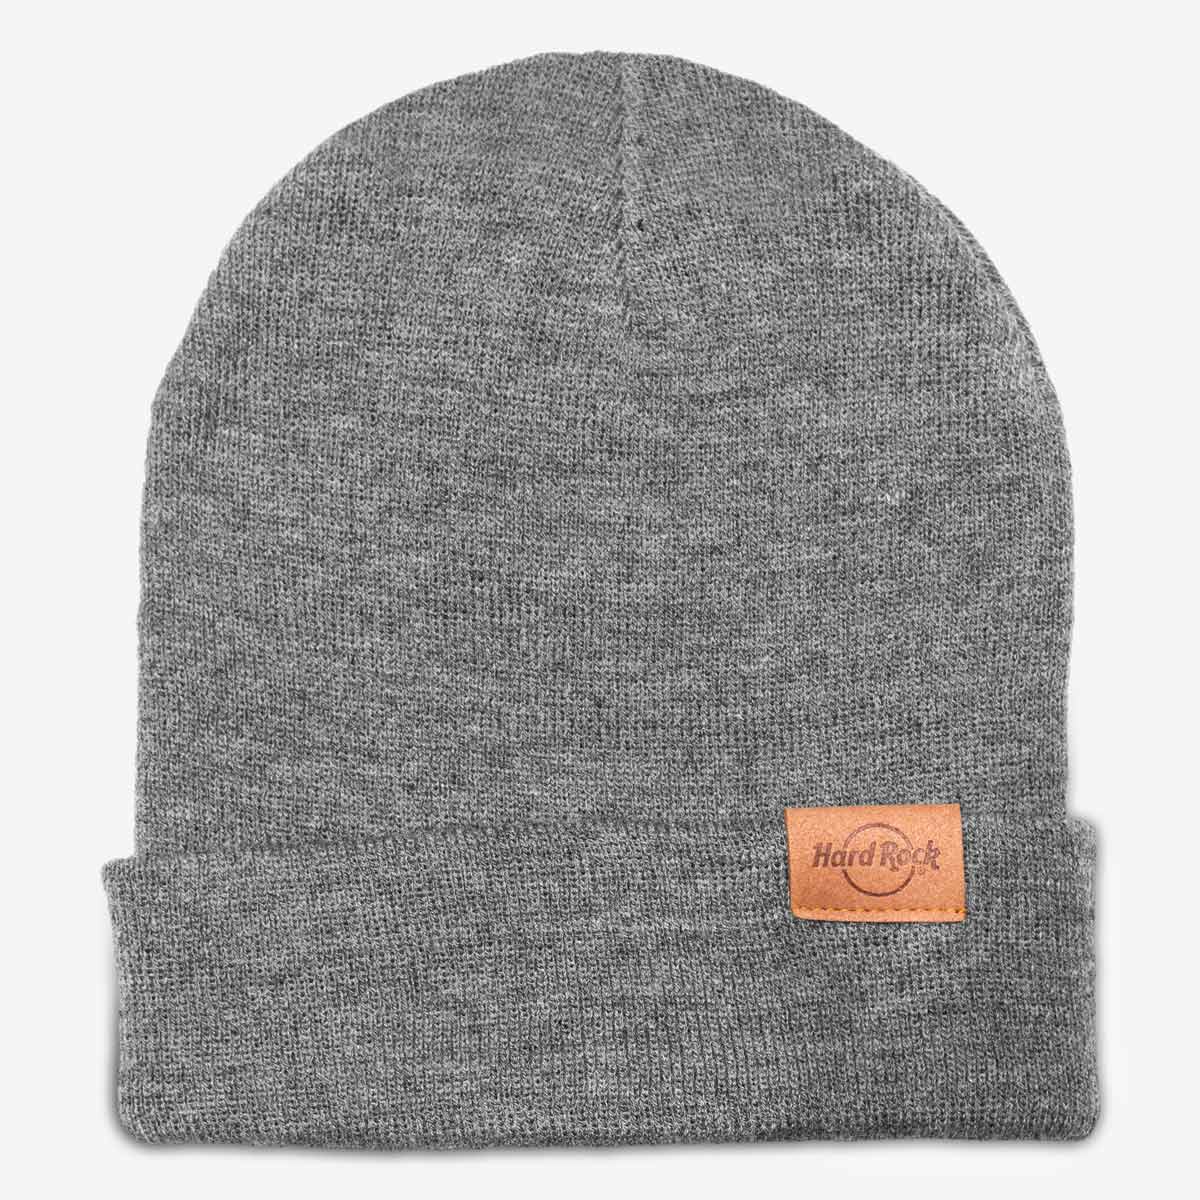 Cuffed Up Hard Rock Beanie in Grey with Tan Logo image number 1